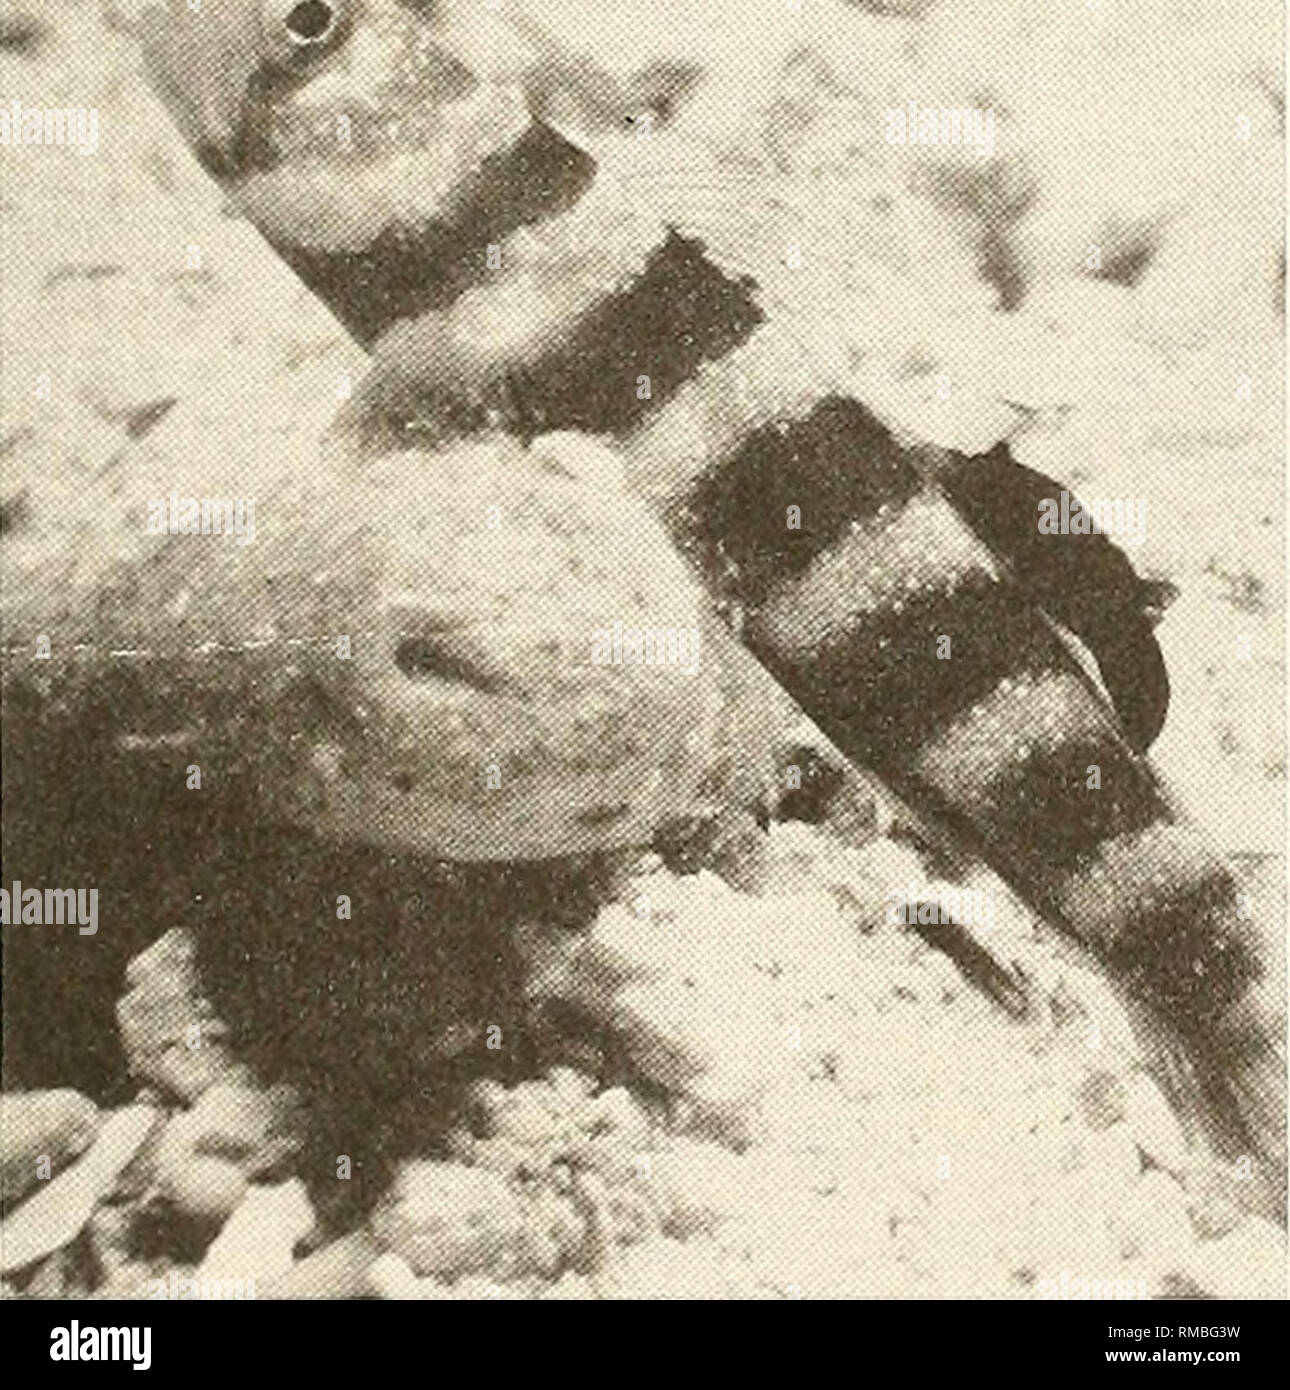 . Annual report - Western Society of Malacologists. Mollusks; Mollusks. Figure 2. Close-up photograph of the nudibranch Gymno- doris nigricolor attached to dorsal spine of the datehaze goby. Photo by R. Bolland. Literature Cited Williams, Ernest H., Jr., and Lucy Bunkley Williams. 1986. The first association of an adult moUusk (Nudibranchia: Dorididae) and a fish (Perciformes: Gobiidae). Venus 45 (3): 210-211.. Figure 1. Datehaze goby fish, Amblyeleotris japonica, with symbiotic nudibranch. Photo by R. Bolland. NORTHEAST PACIFIC MACTRIDAE COMPRISE SIX SUPRASPECIFIC TAXA, NONE OF THEM MACTRA OR Stock Photo